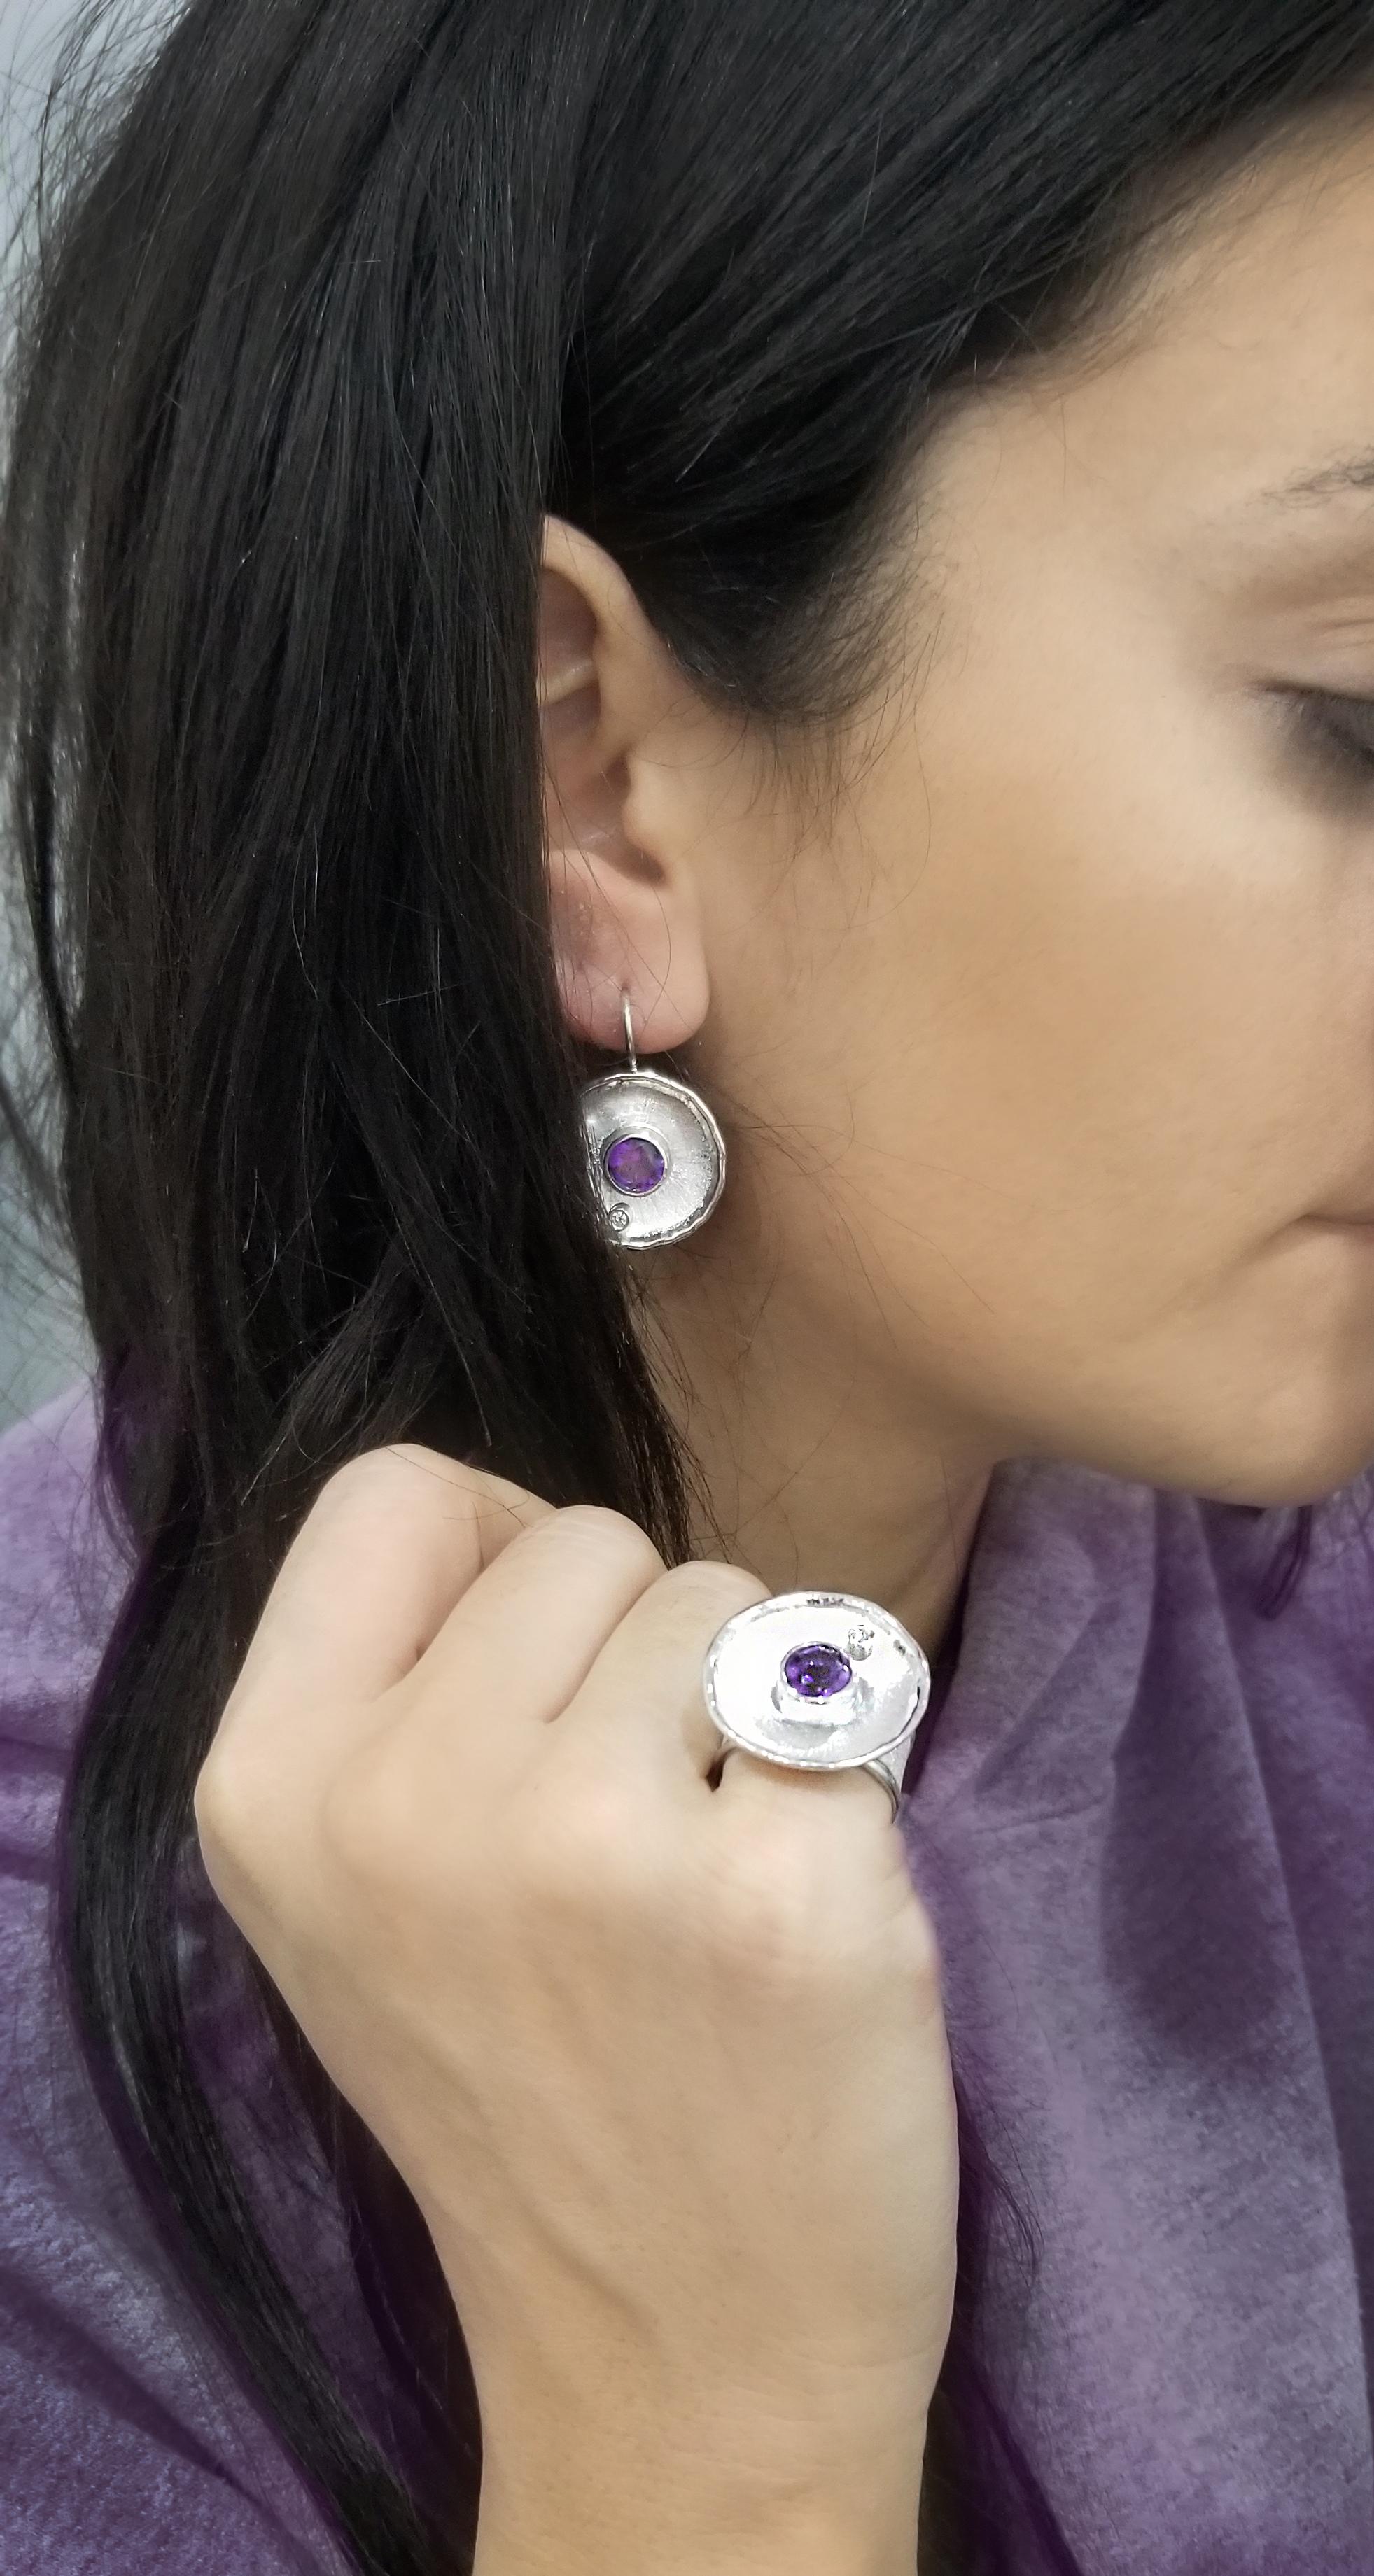 Yianni Creations 4.90 Carat Amethyst Diamond Set of Silver Earrings and Ring 10